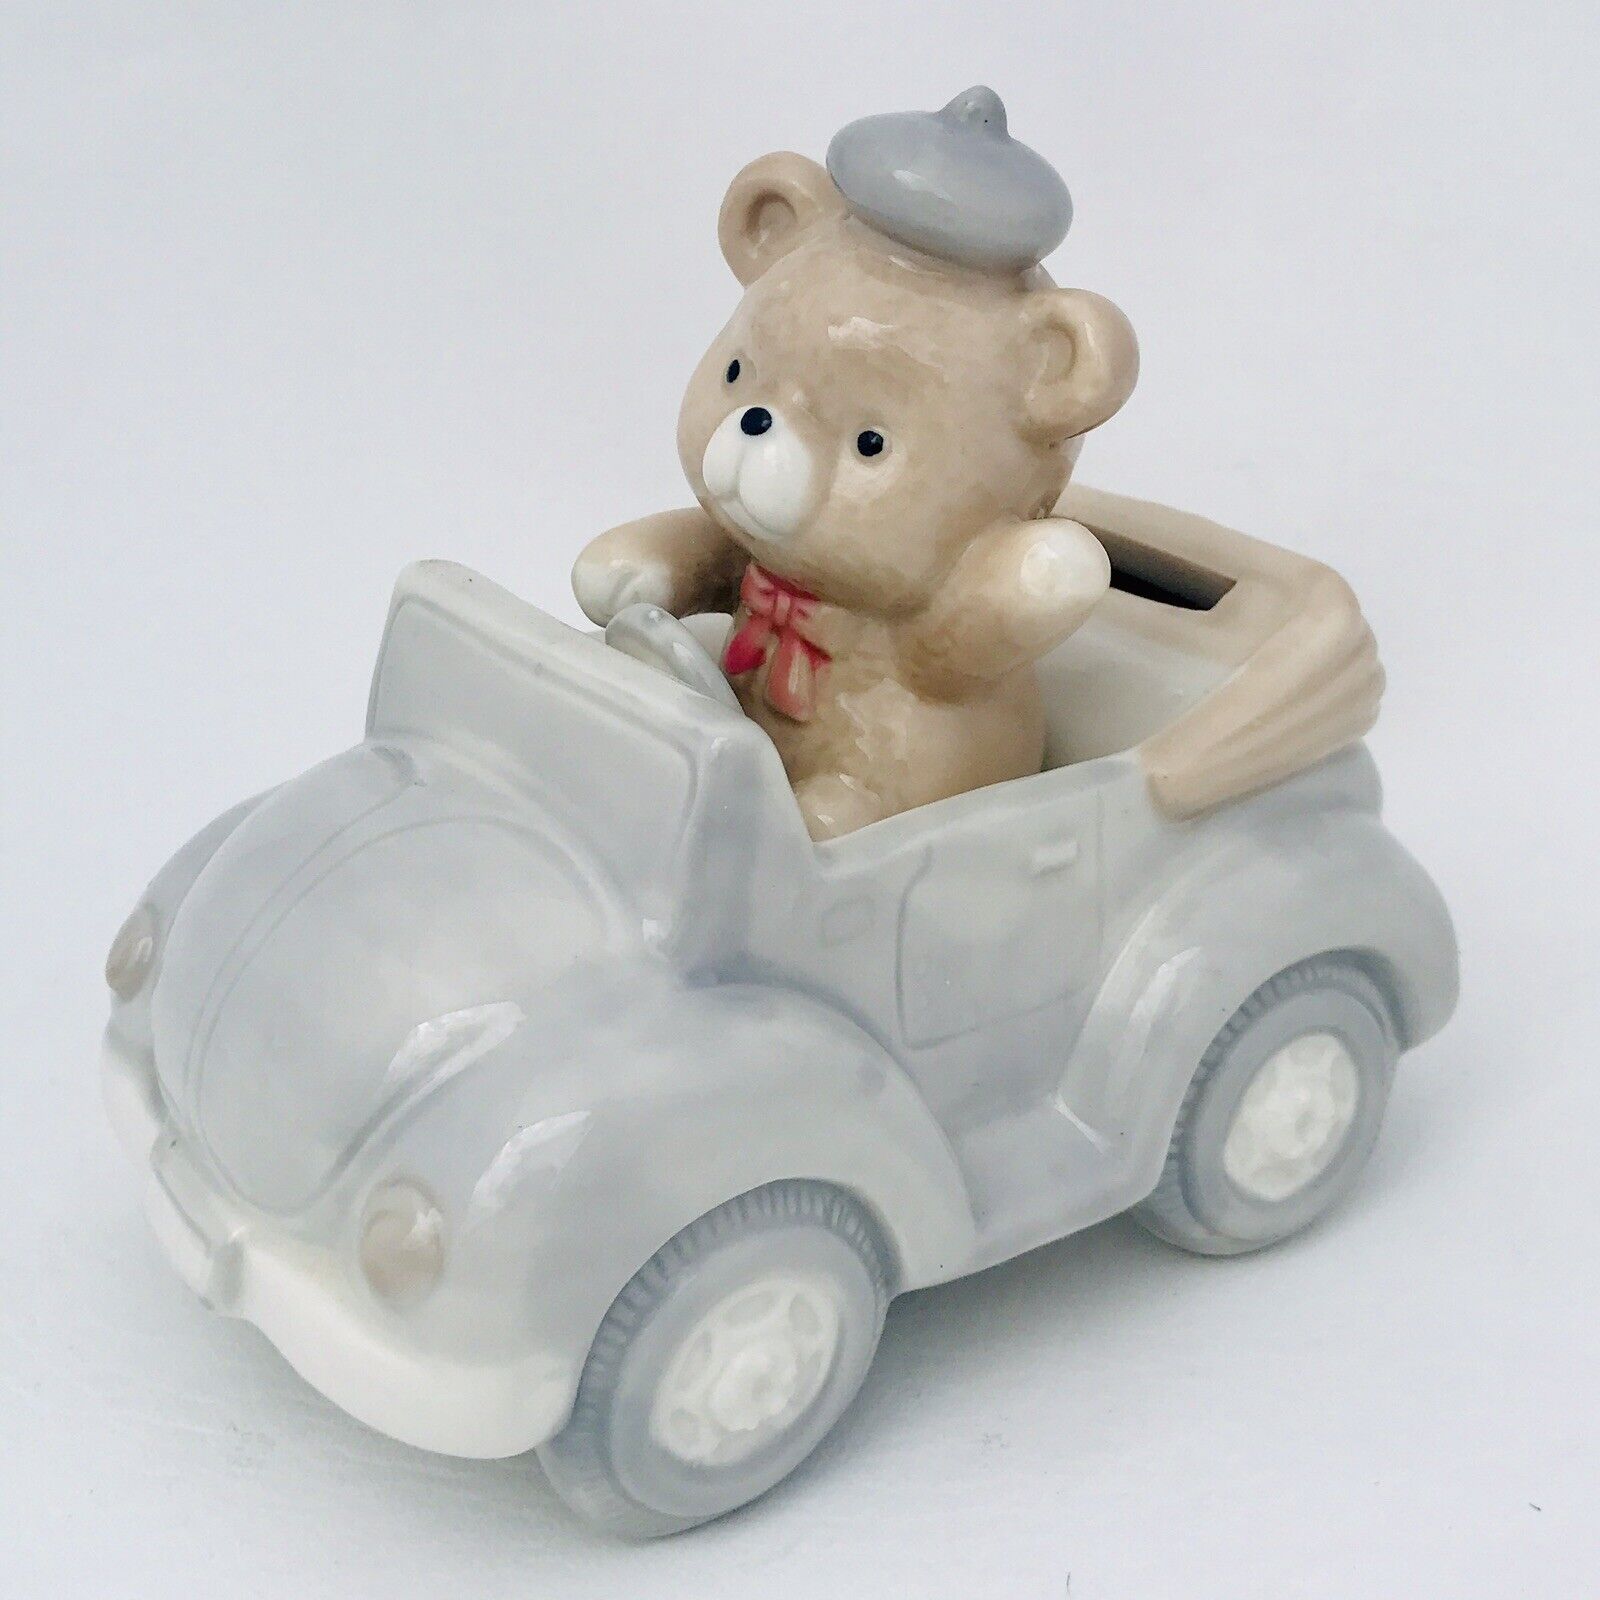 Bear Wearing Hat in Classic Convertible Car Vintage Porcelain Figurine Coin Bank